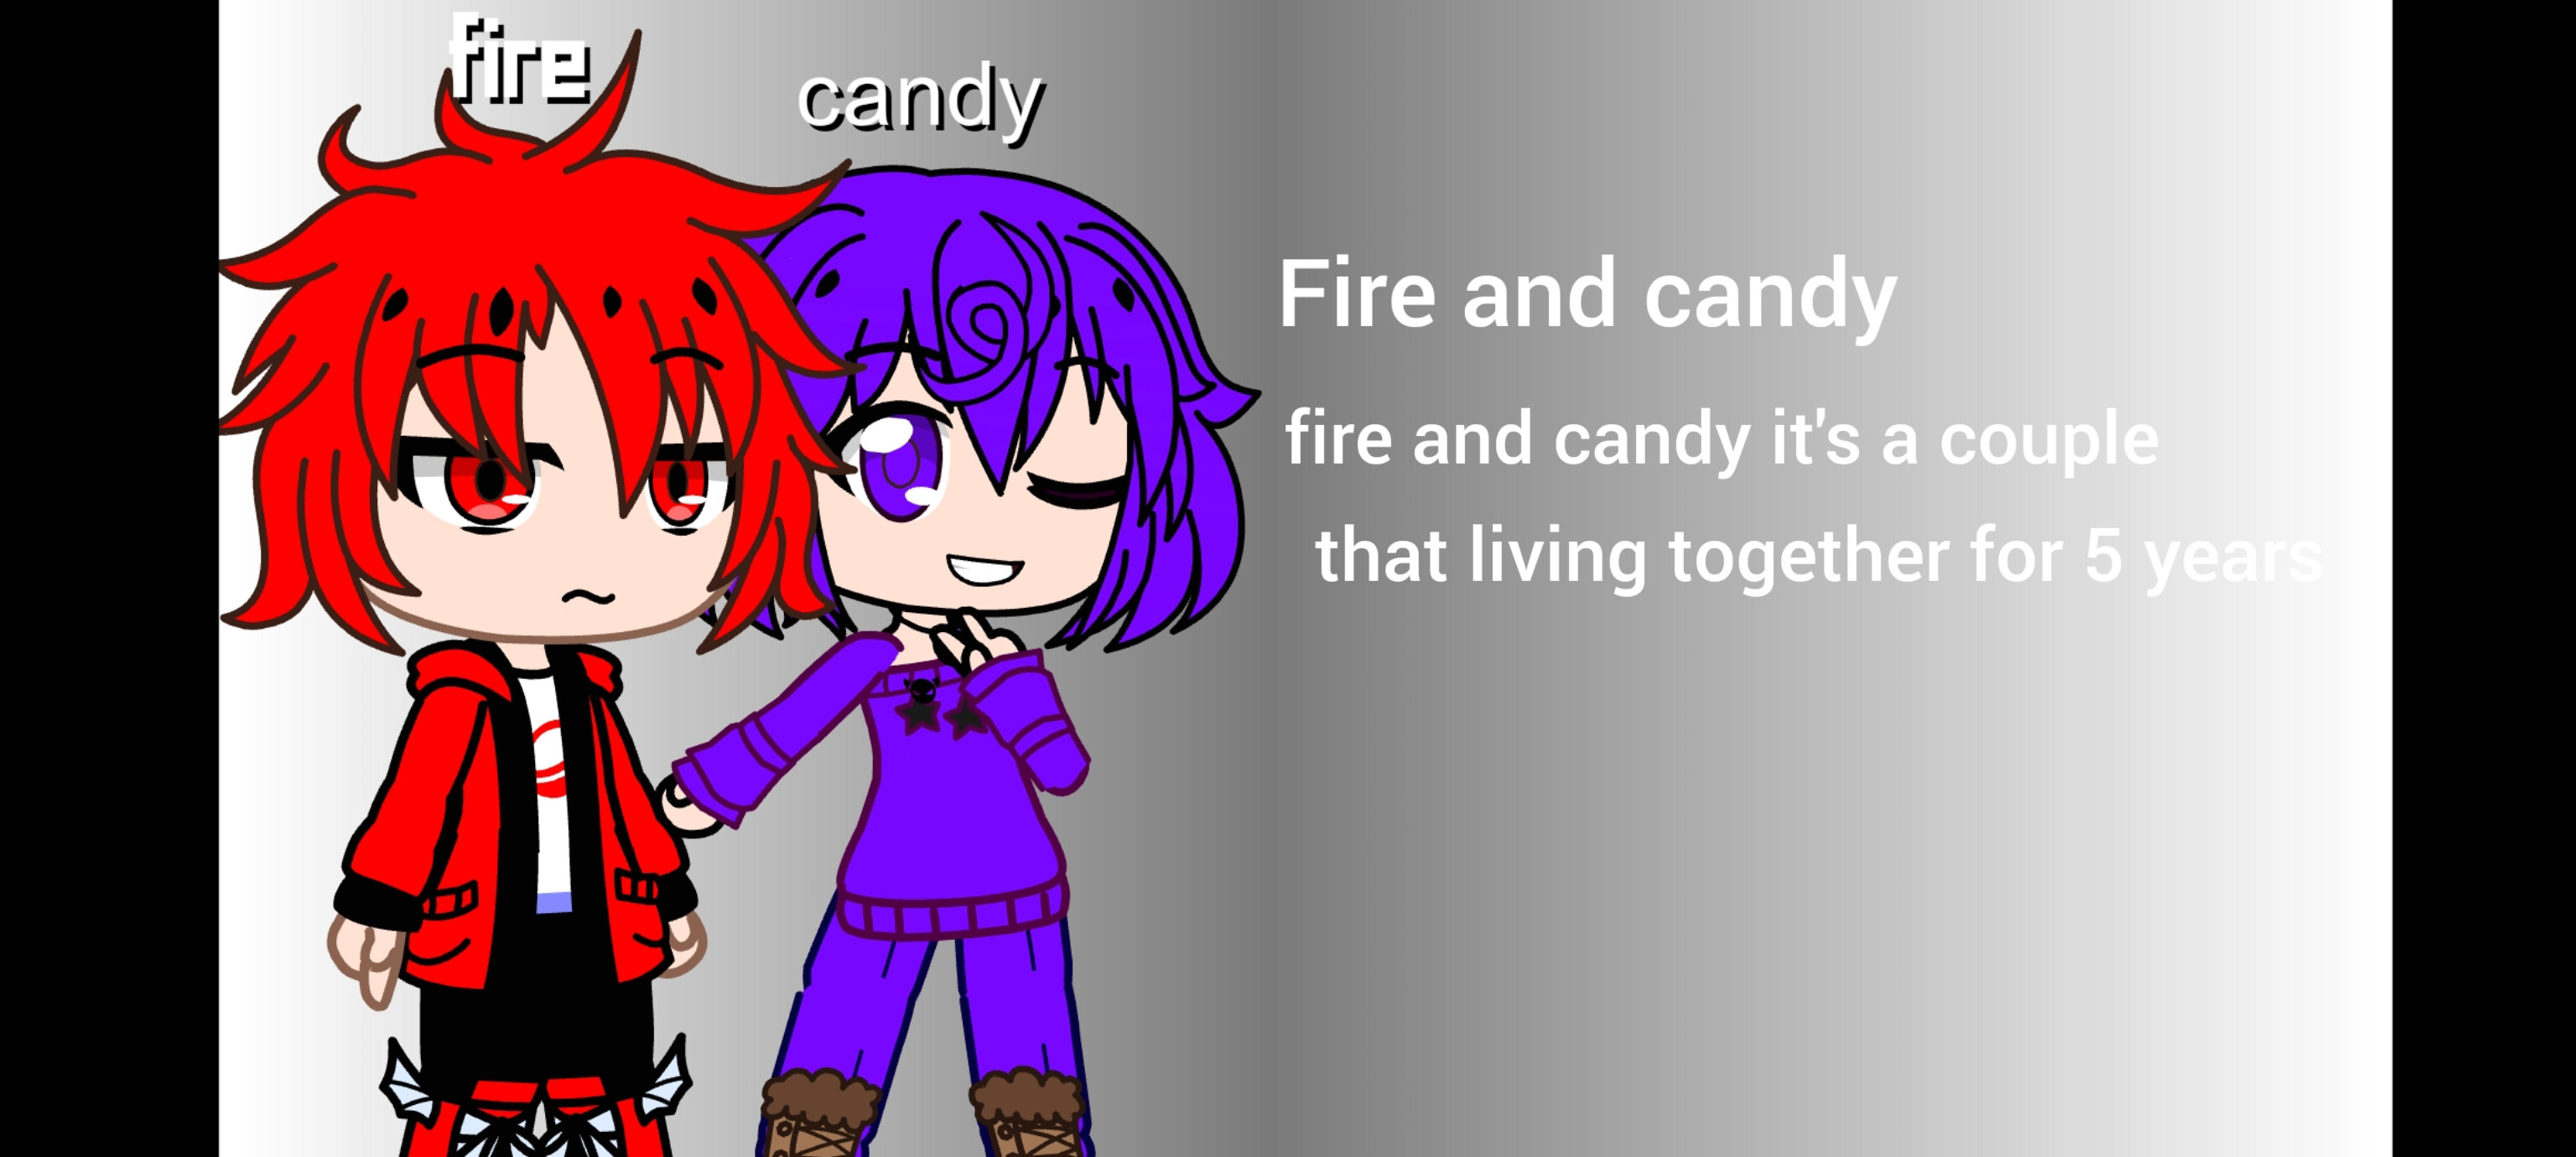 Fire and candy